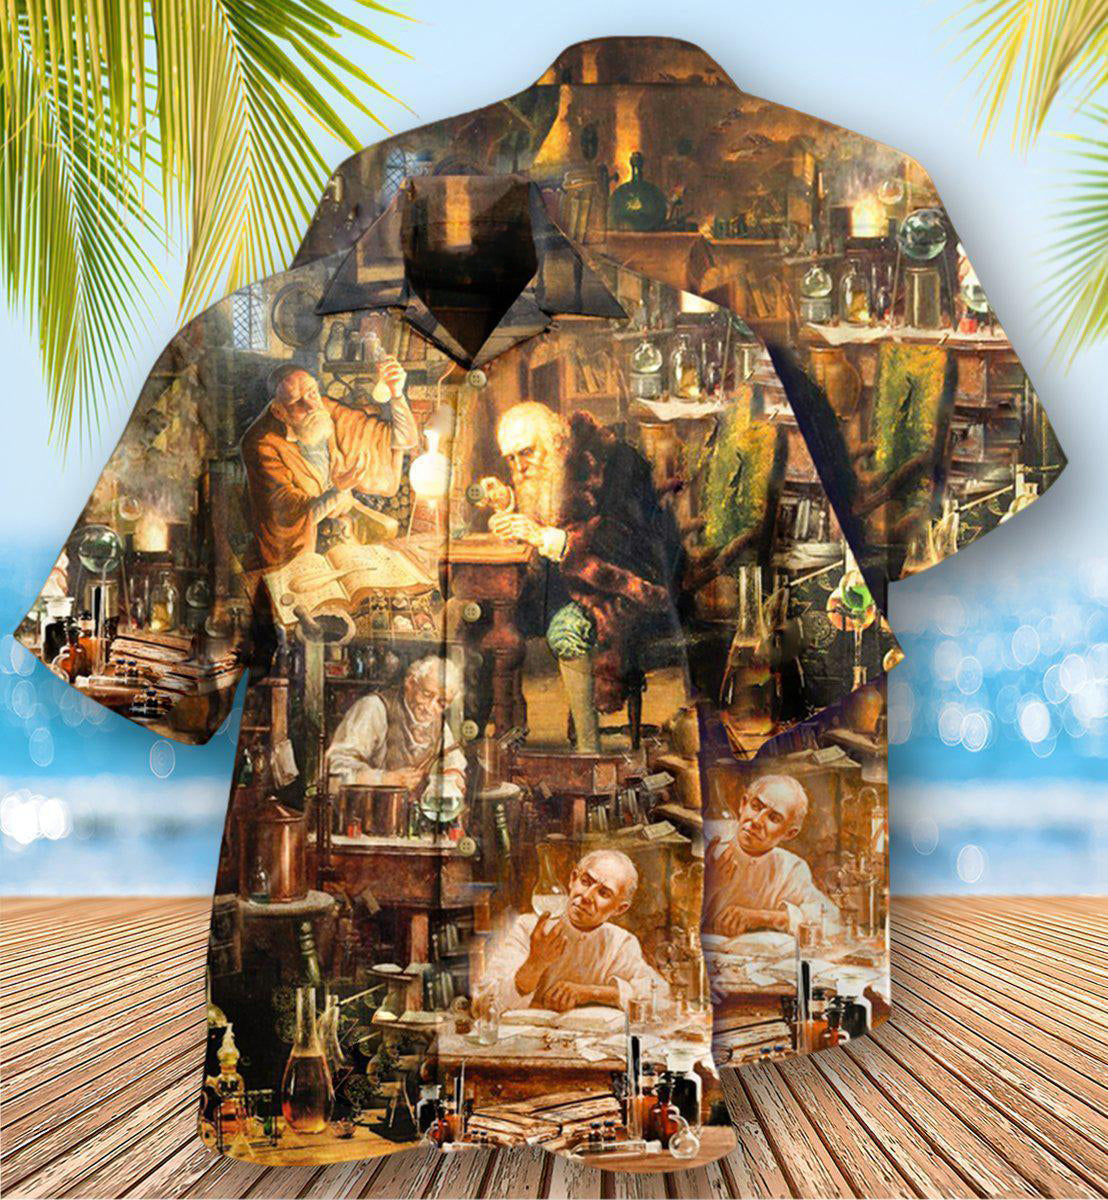 Chemistry One Thing That You Can't Fake Is Chemistry Research - Hawaiian Shirt - Owls Matrix LTD